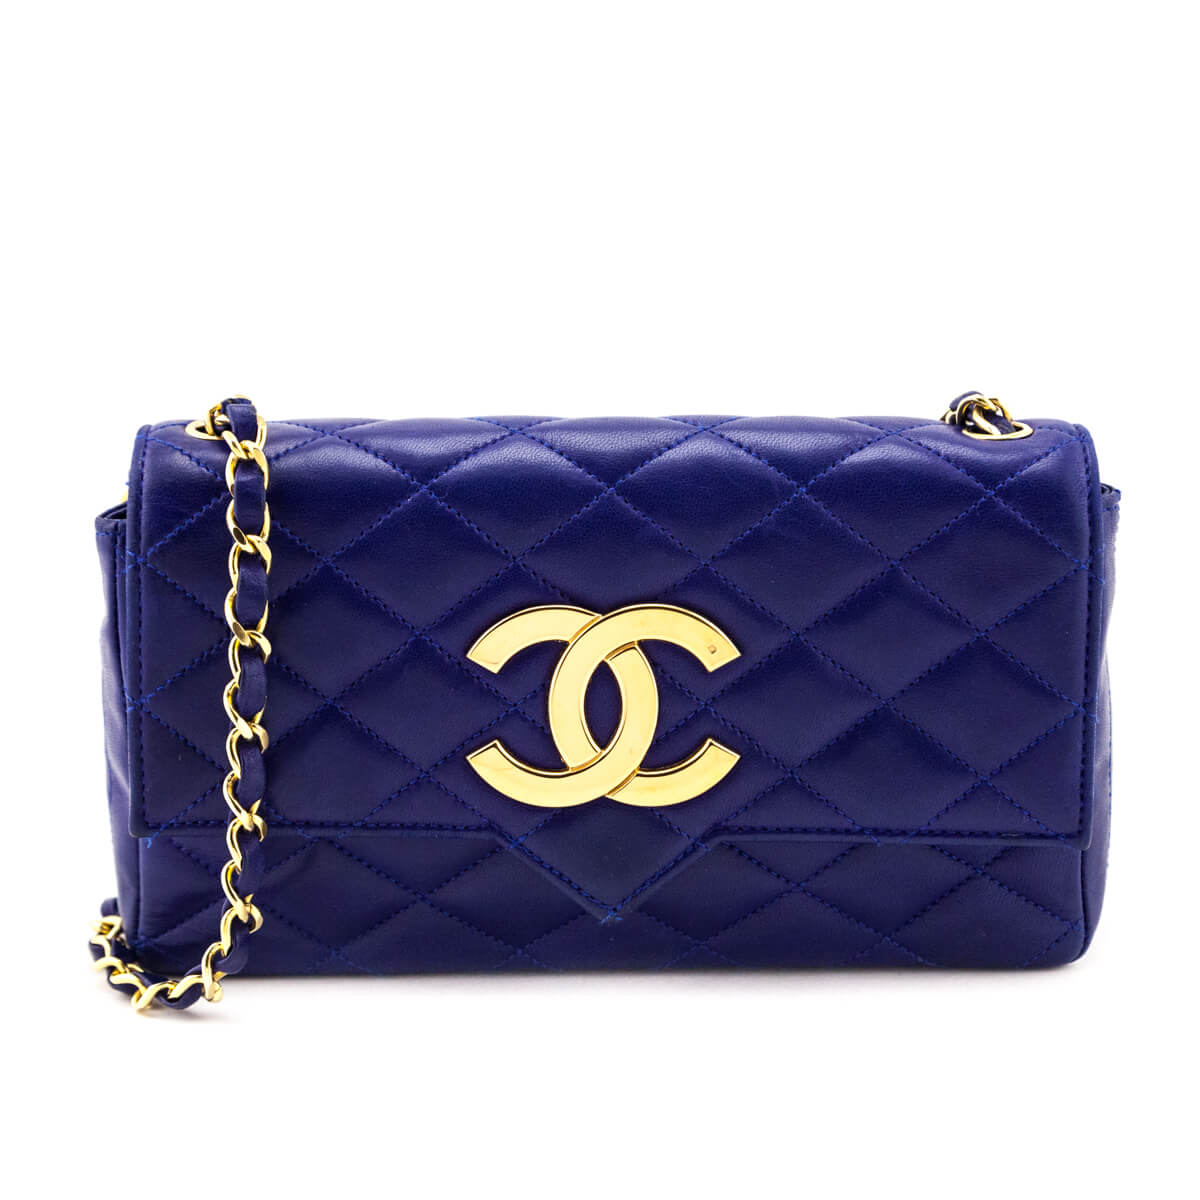 How to Authenticate a CHANEL Bag with LOVEthatBAG